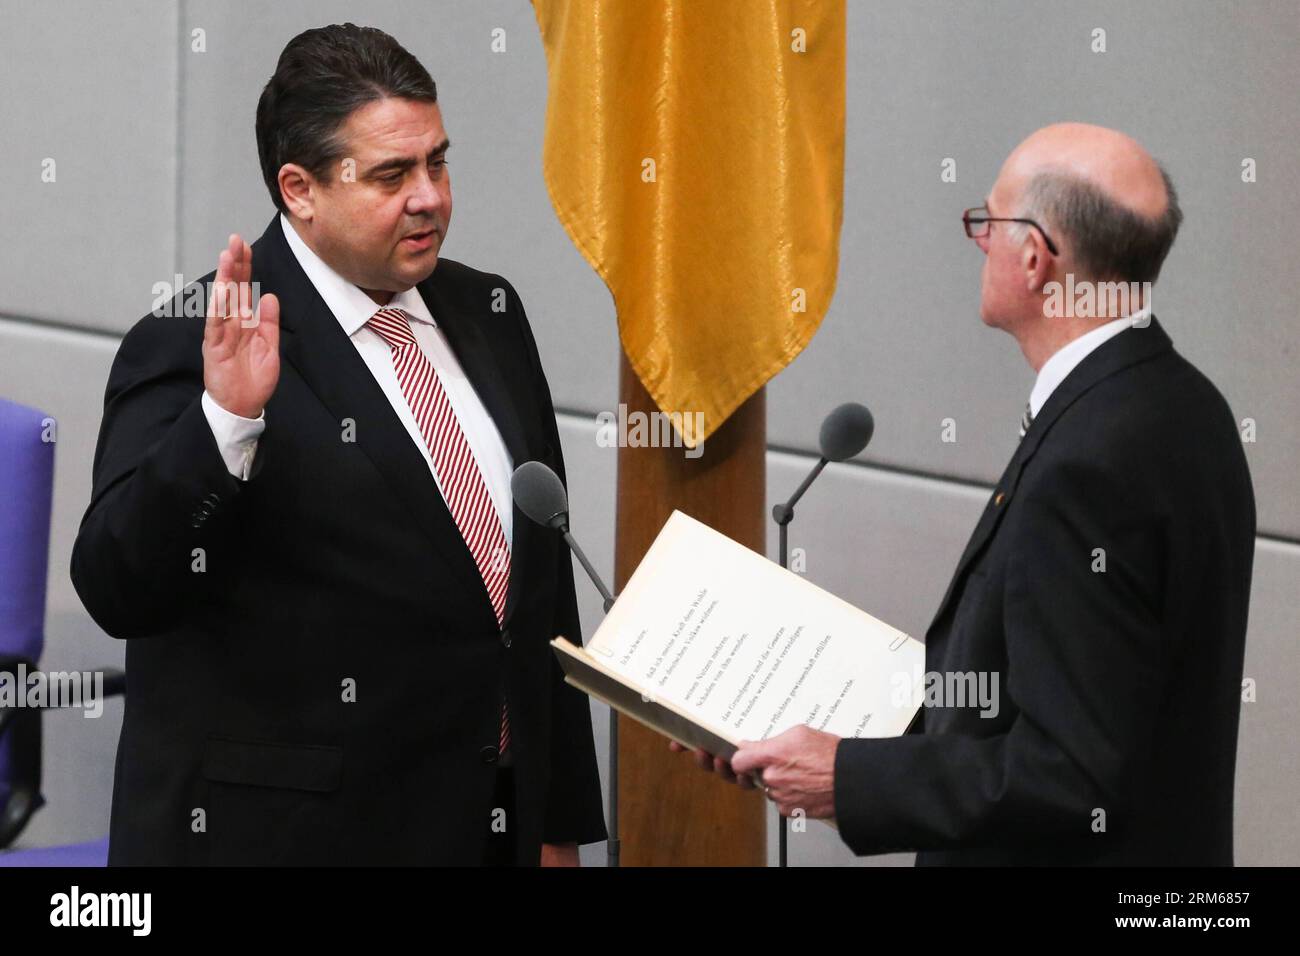 (131217) -- BERLIN, Dec. 17, 2013 (Xinhua) -- German Vice-Chancellor and Minister of Economics and Energy Sigmar Gabriel (L) is sworn-in by Parliament President Norbert Lammert during the meeting of Bundestag, Germany s lower house of parliament, in Berlin, Germany on Dec. 17, 2013. German new government headed by Chancellor Angela Merkel was sworn into office on Tuesday to rule Europe s biggest economy for the next four years. Cabinet ministers of the new coalition government, are formed by Merkel s Christian Democratic Union (CDU), its Bavarian sister party Chrisitian Social Union (CSU), and Stock Photo